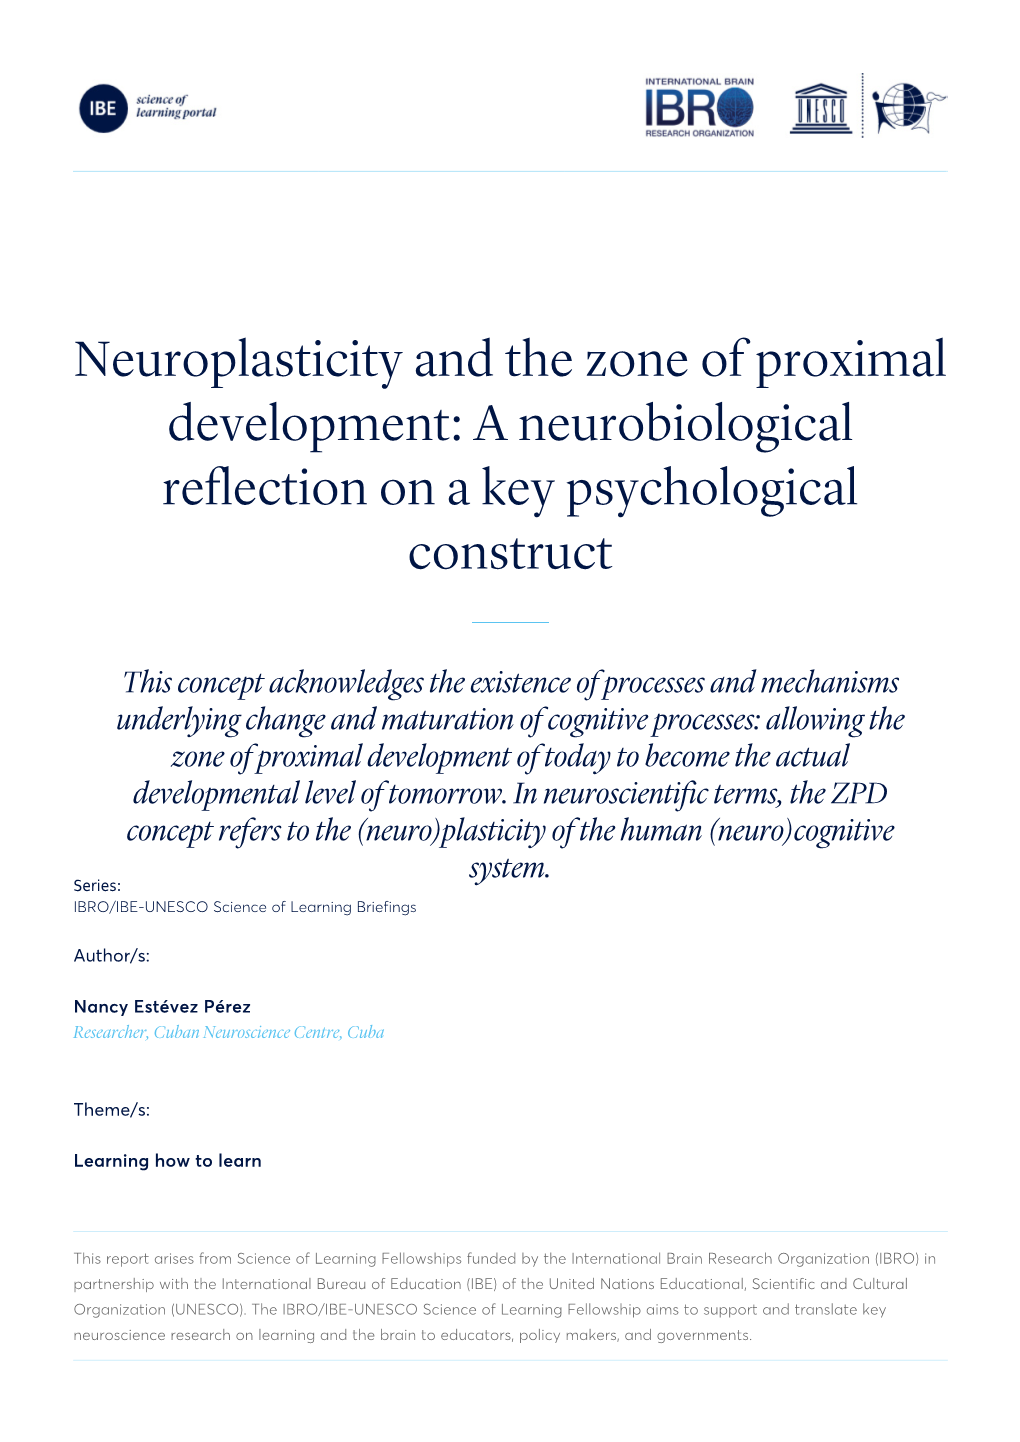 Neuroplasticity and the Zone of Proximal Development: a Neurobiological Reflection on a Key Psychological Construct